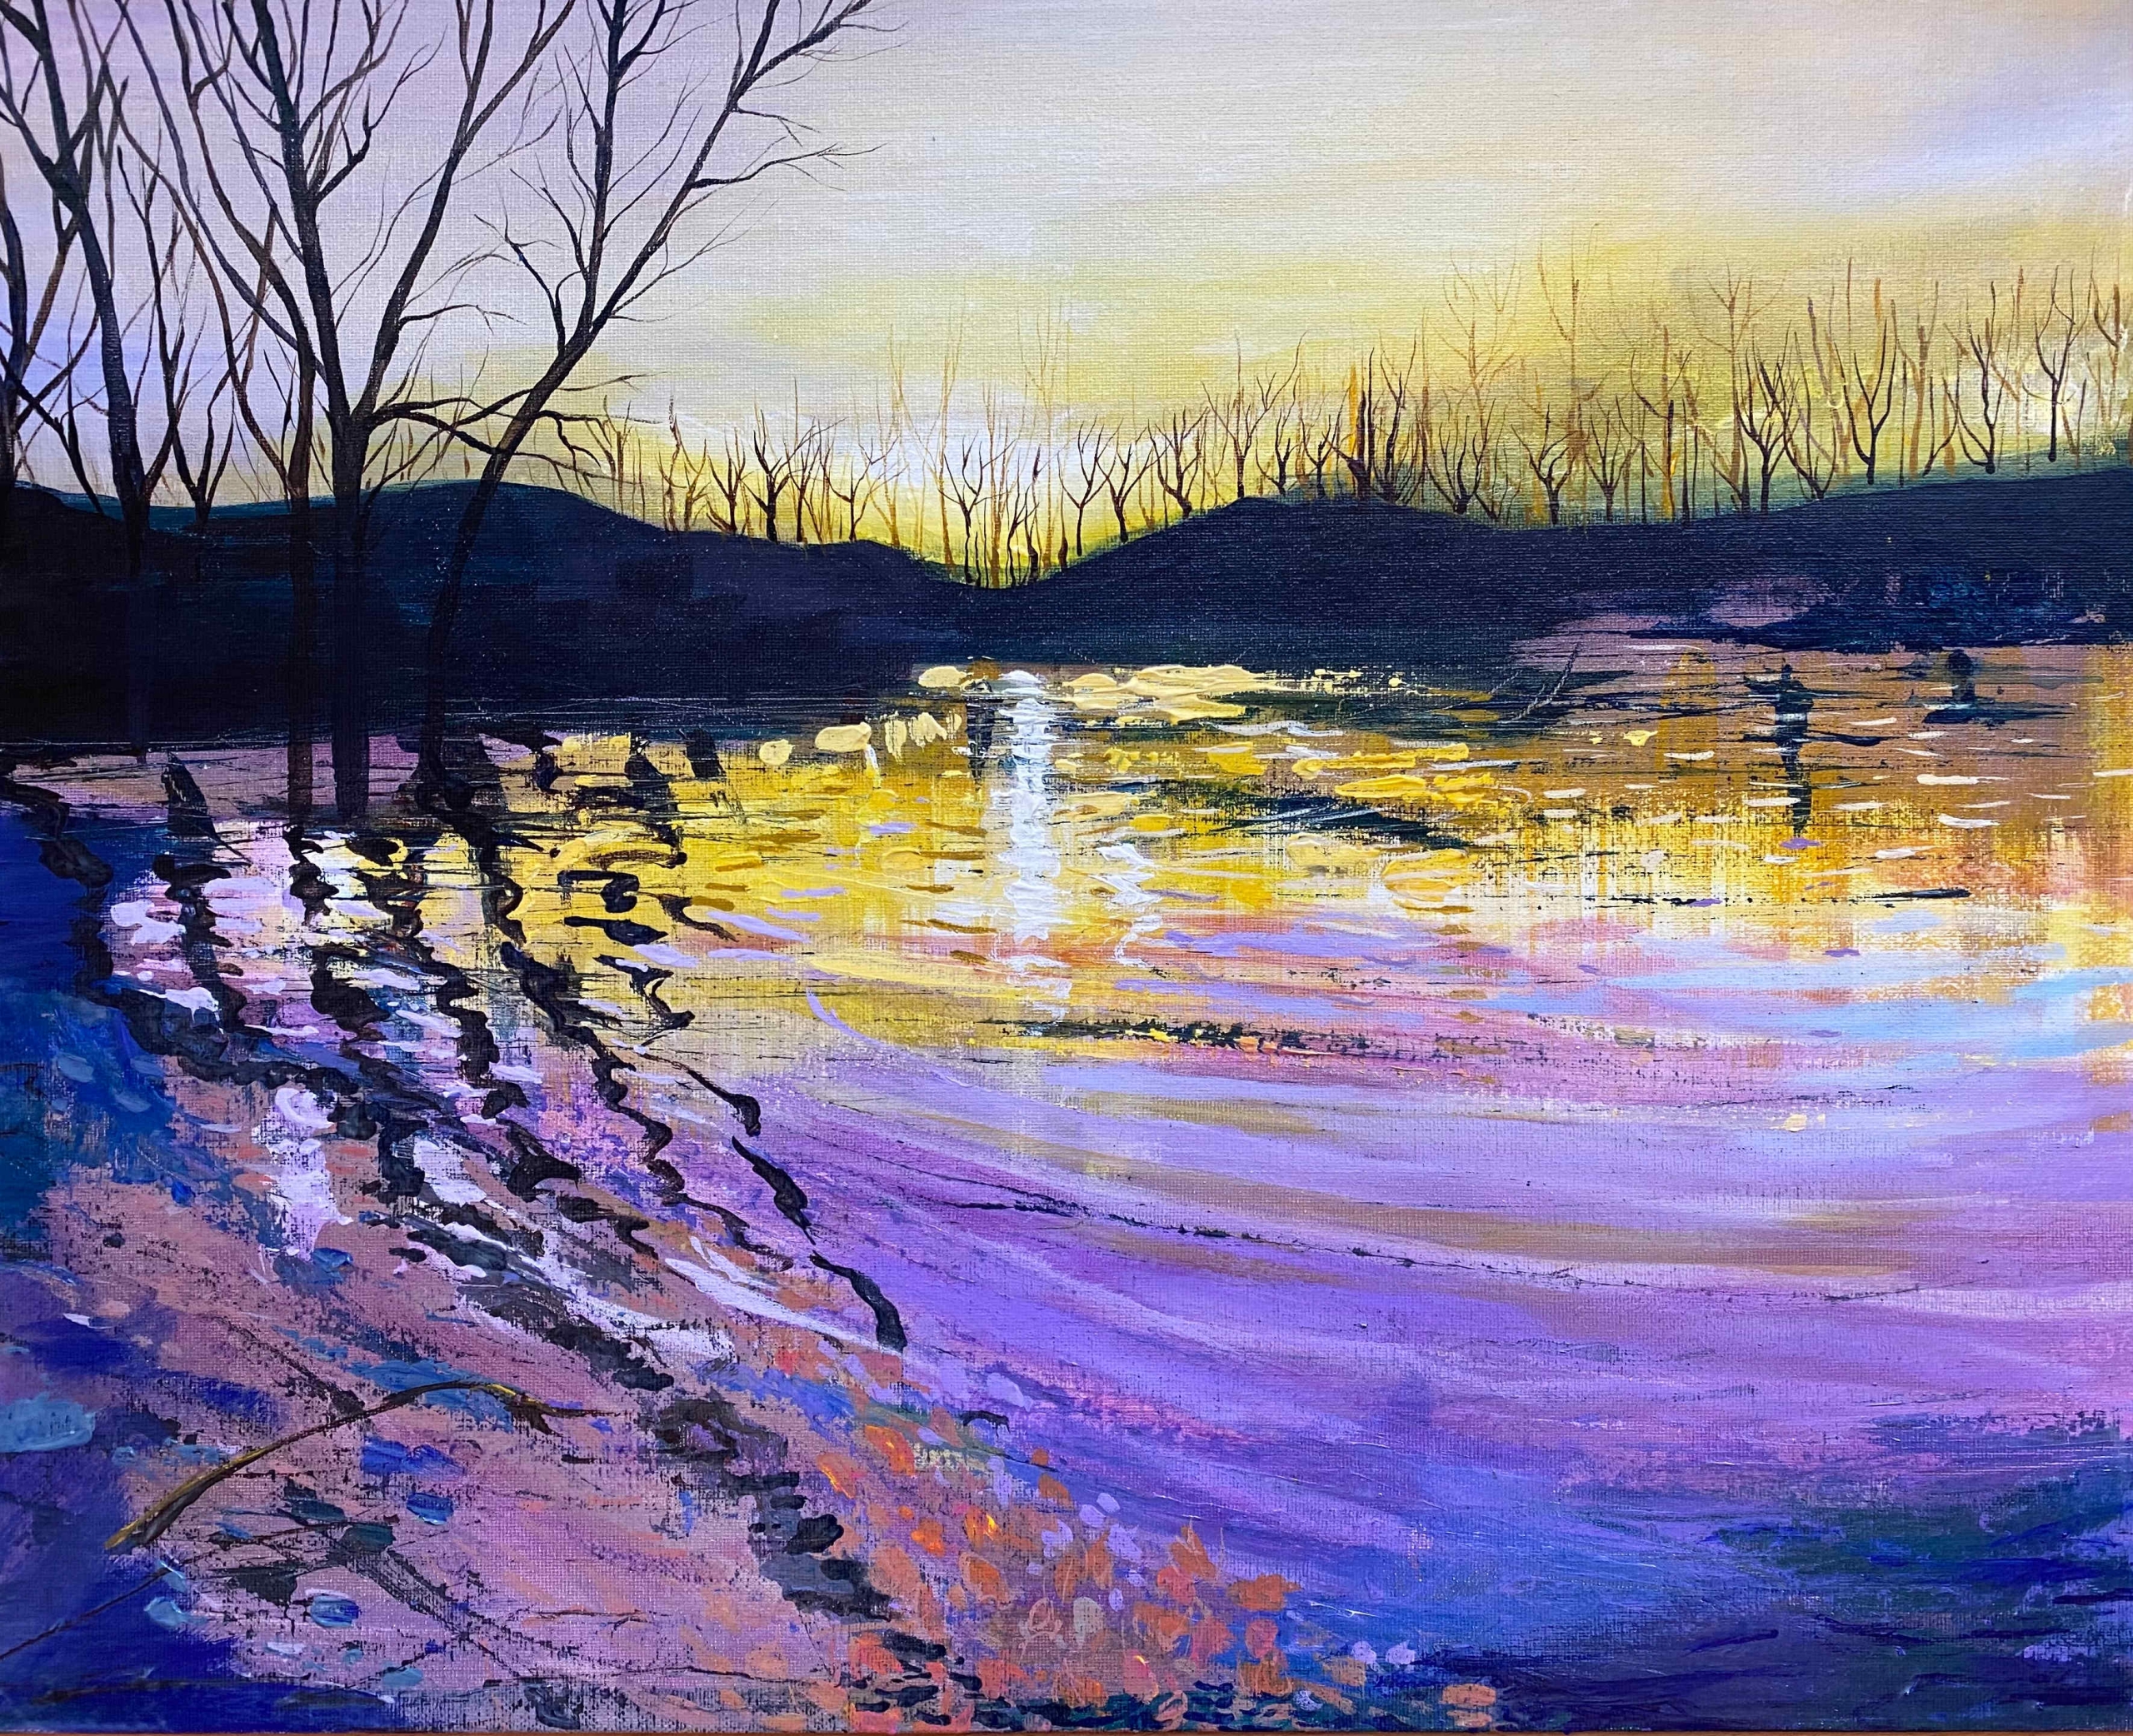 sunrise image over water by artist natalie gilmore